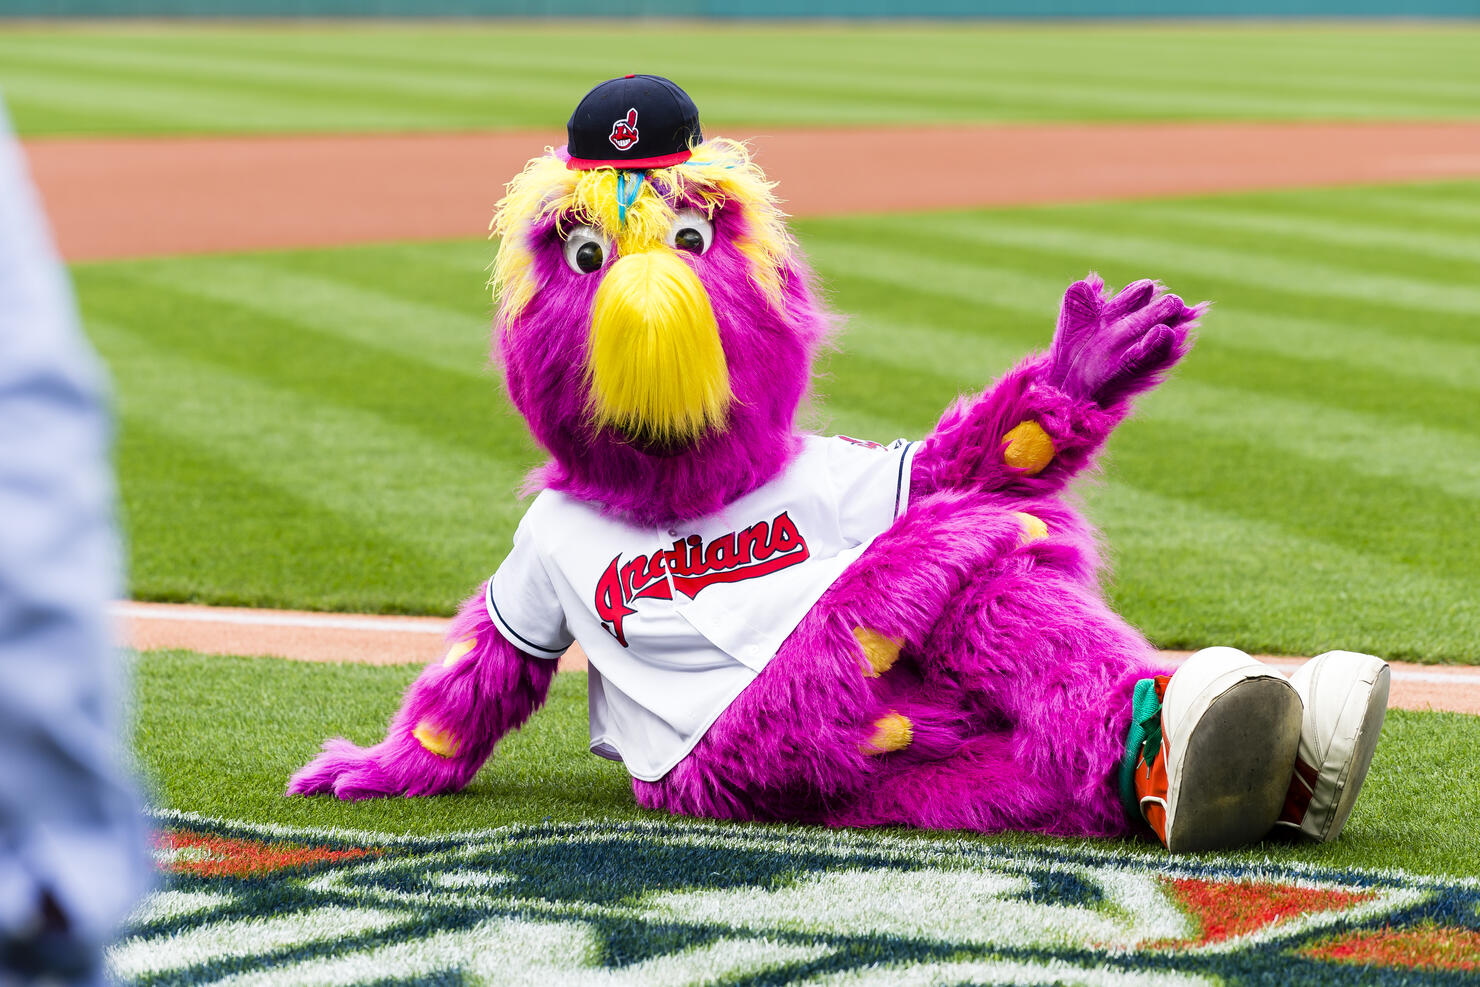 Cleveland Indians' 'Slider' Is Rated The Worst Mascot In MLB